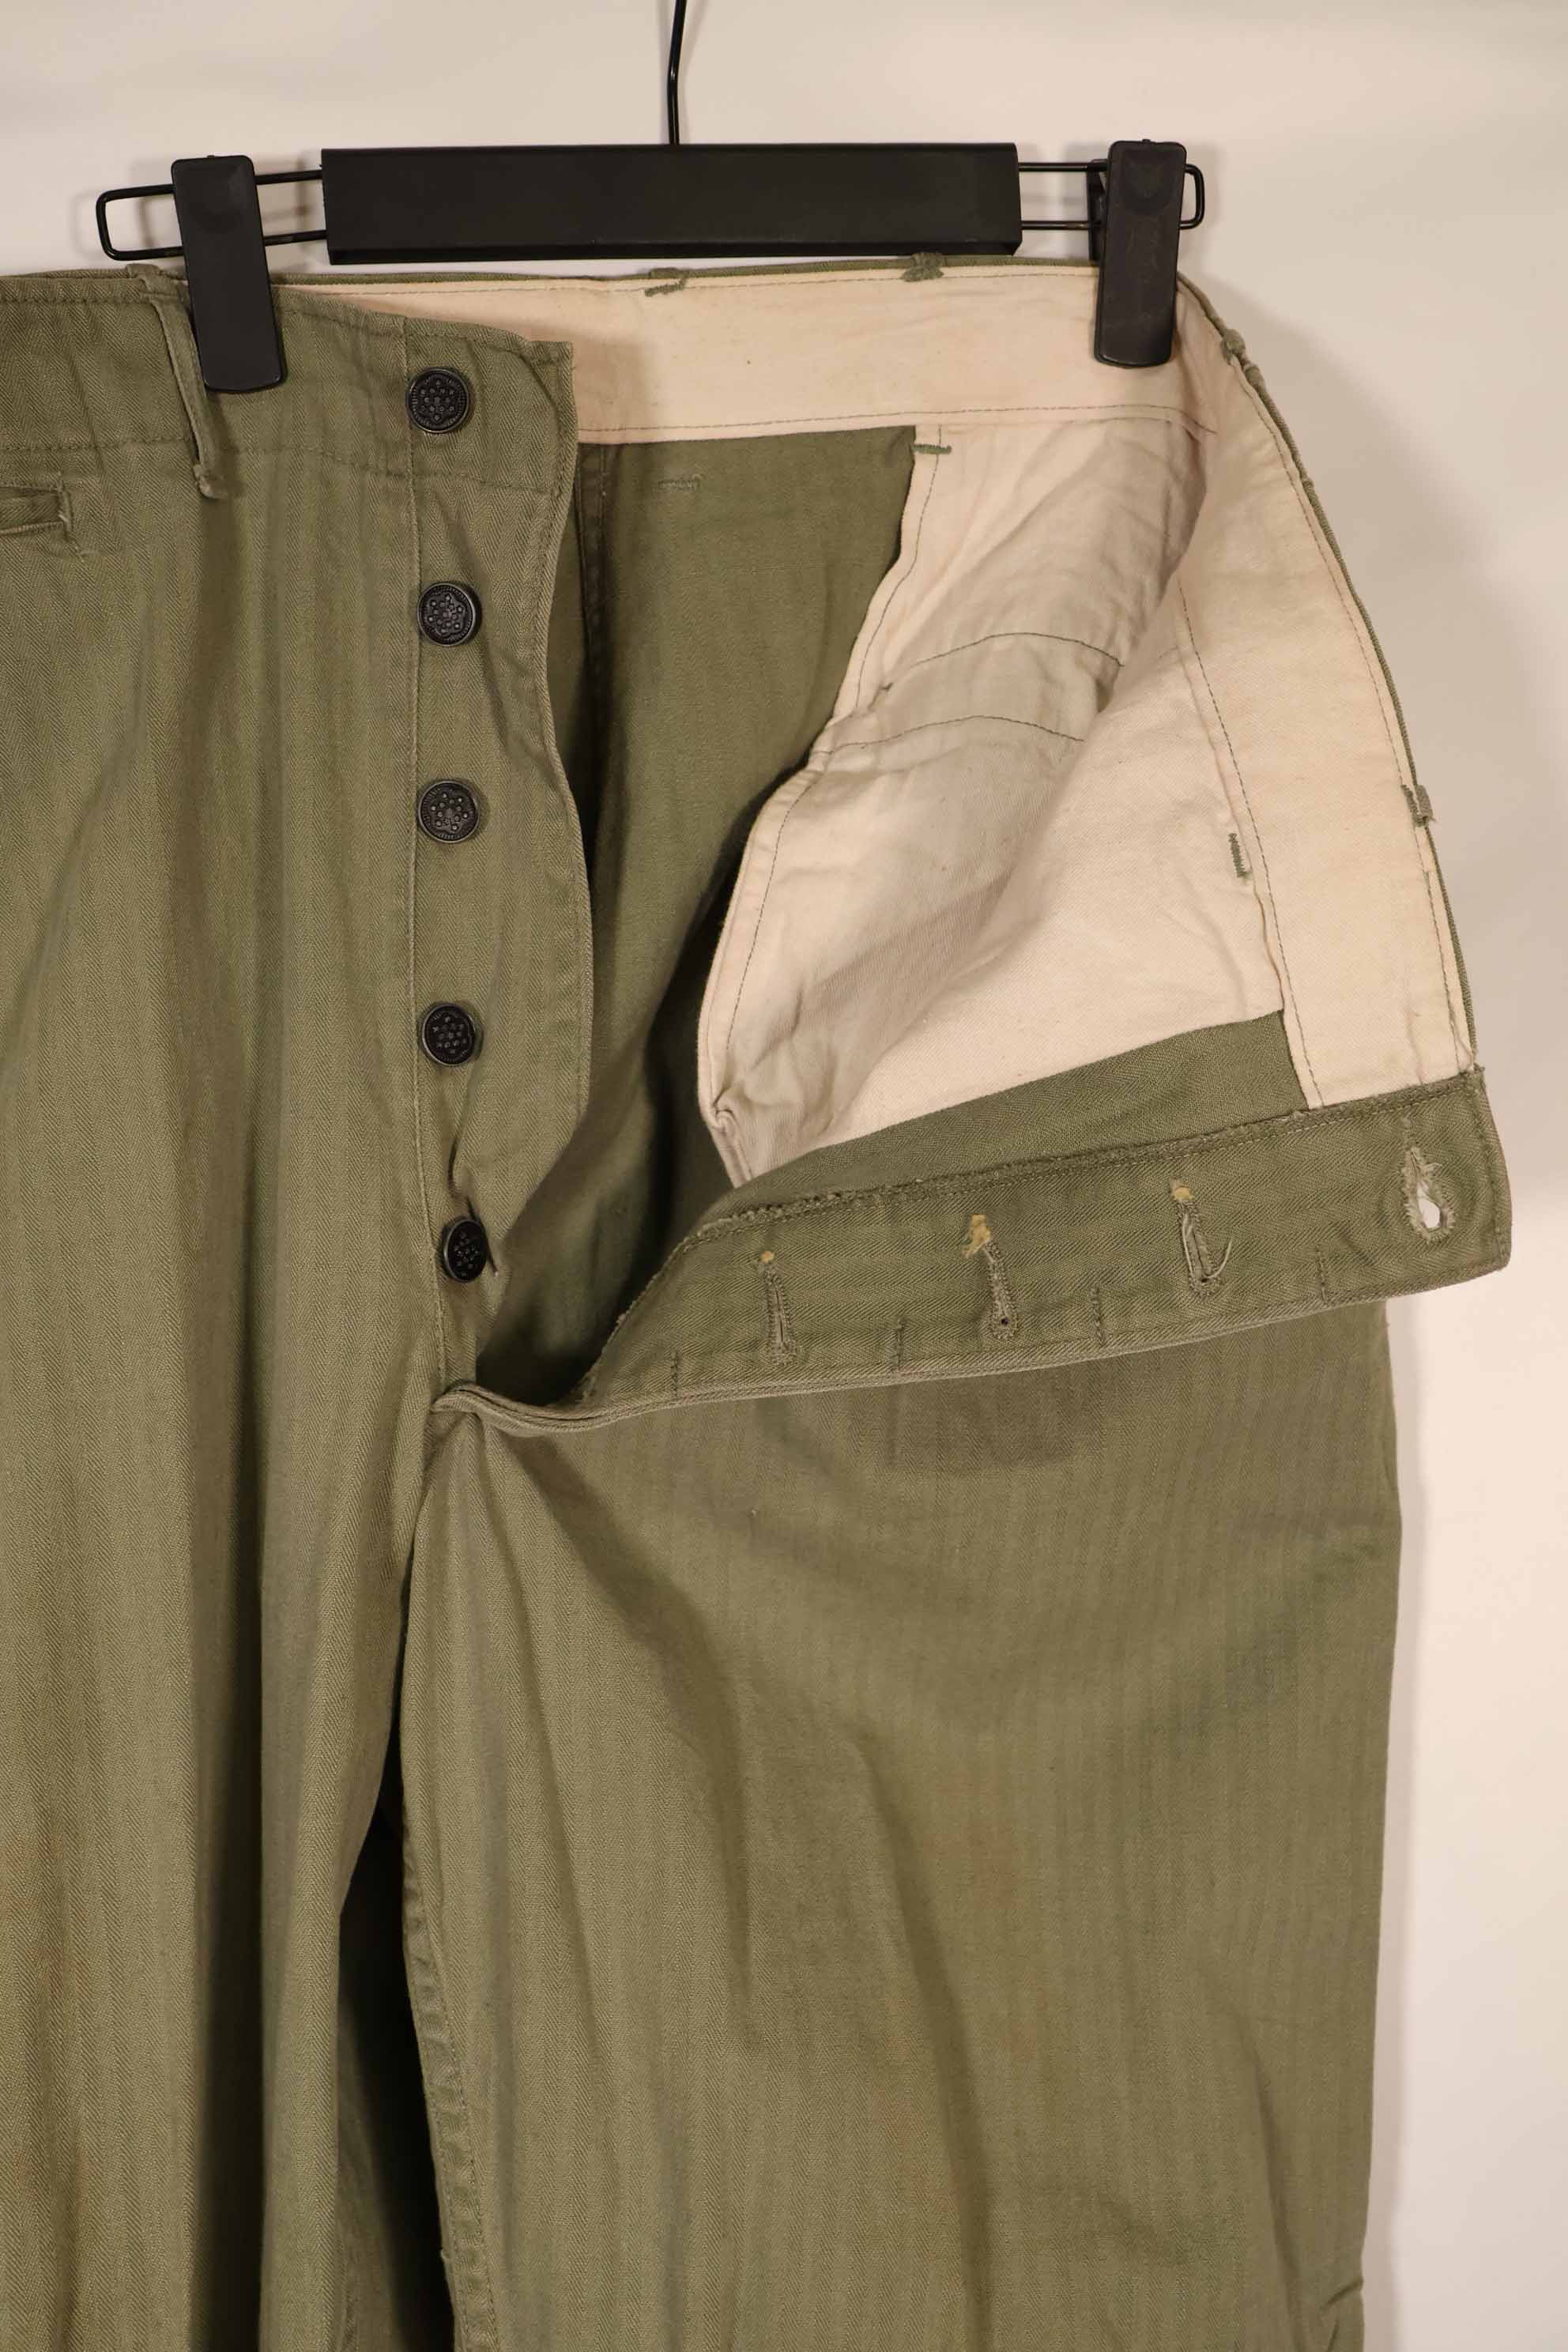 Real 1940s US Army HBT OD Utility Pants, used, large size.